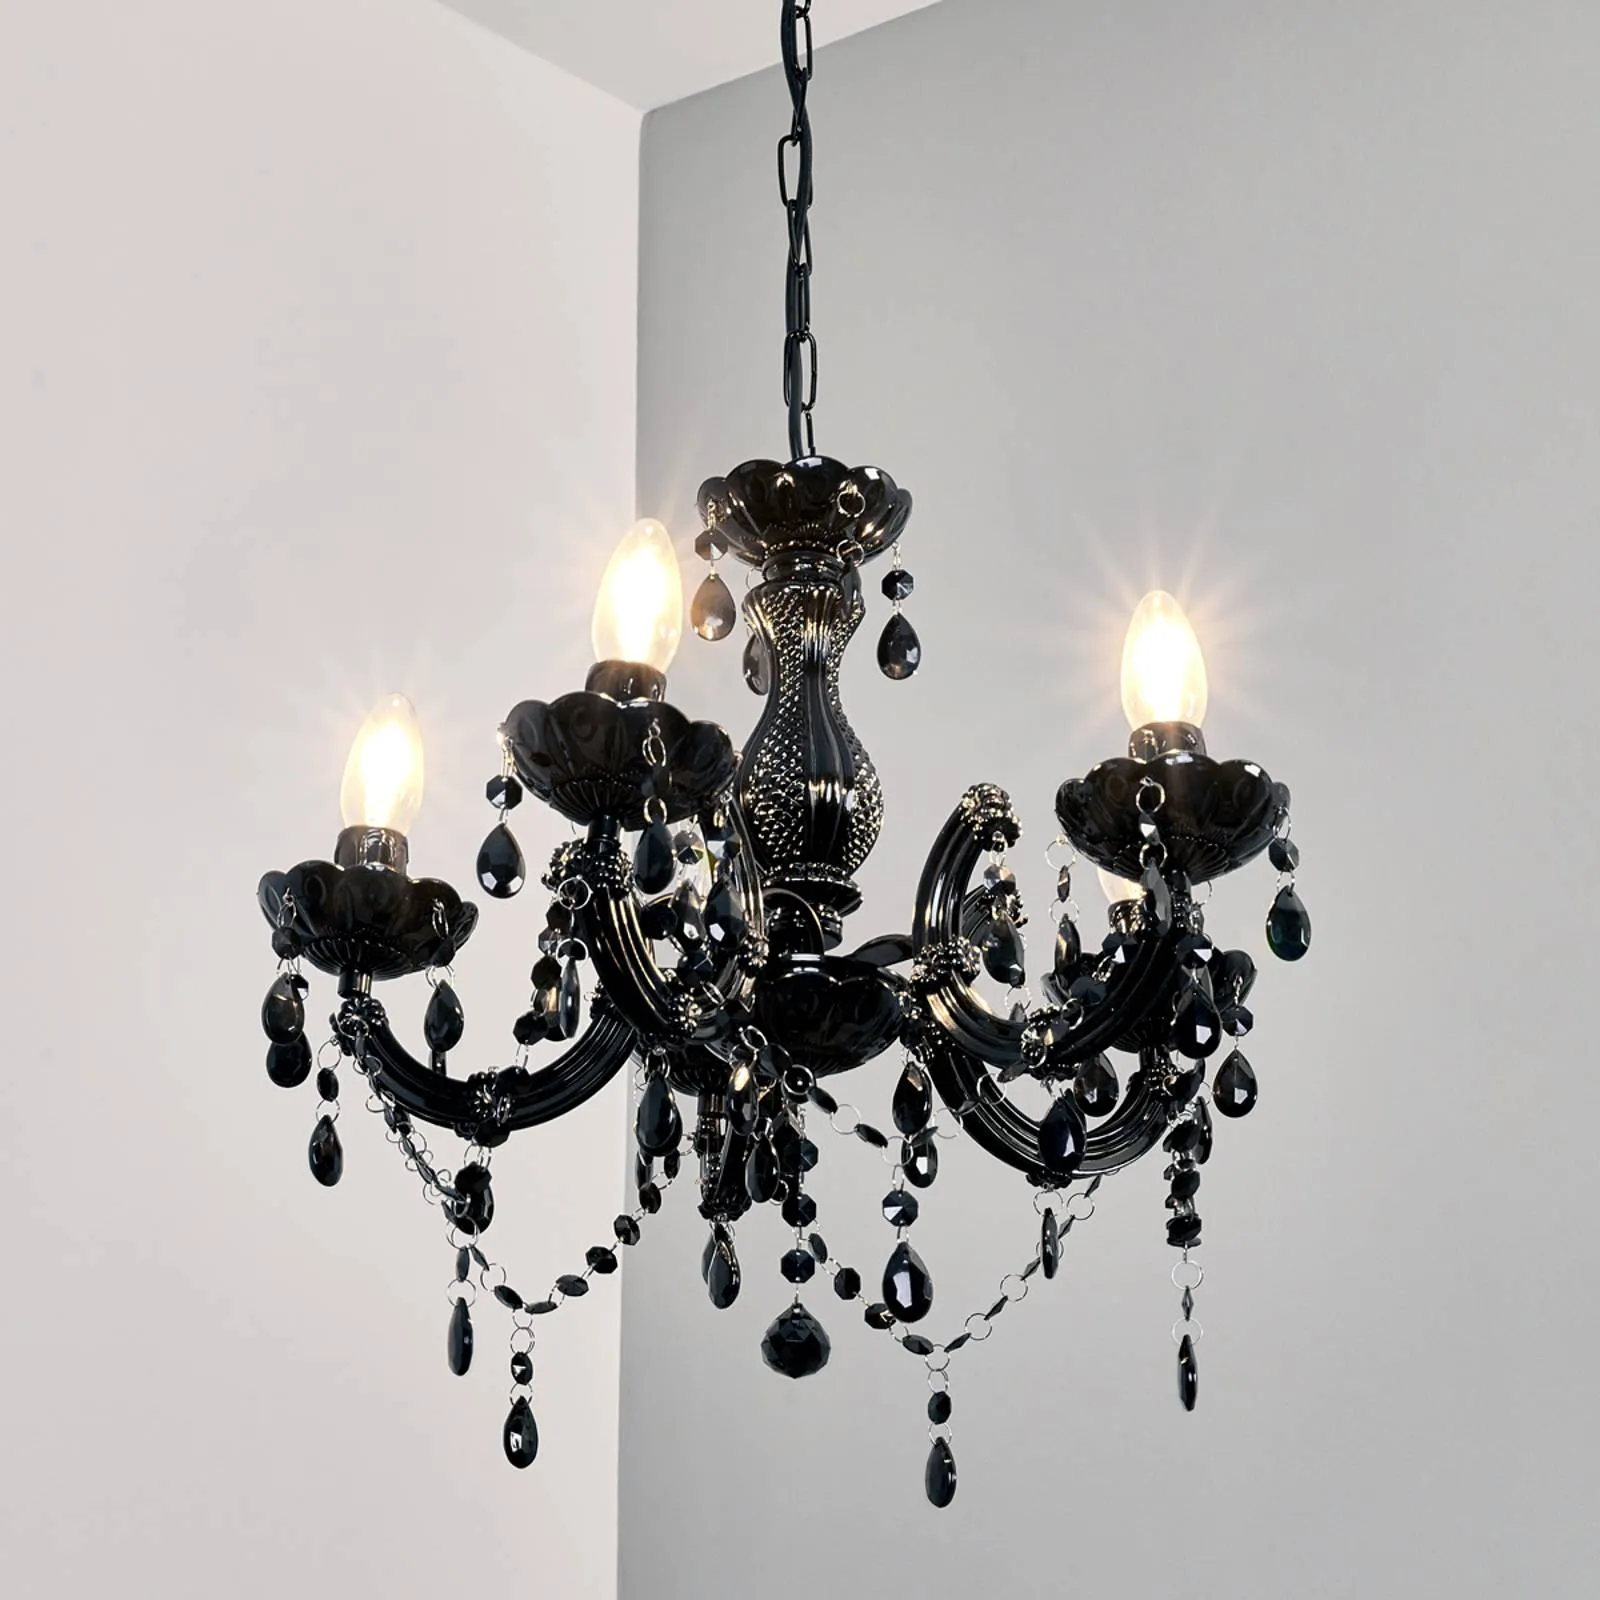 Mysterious-looking Arabesque chandelier, black